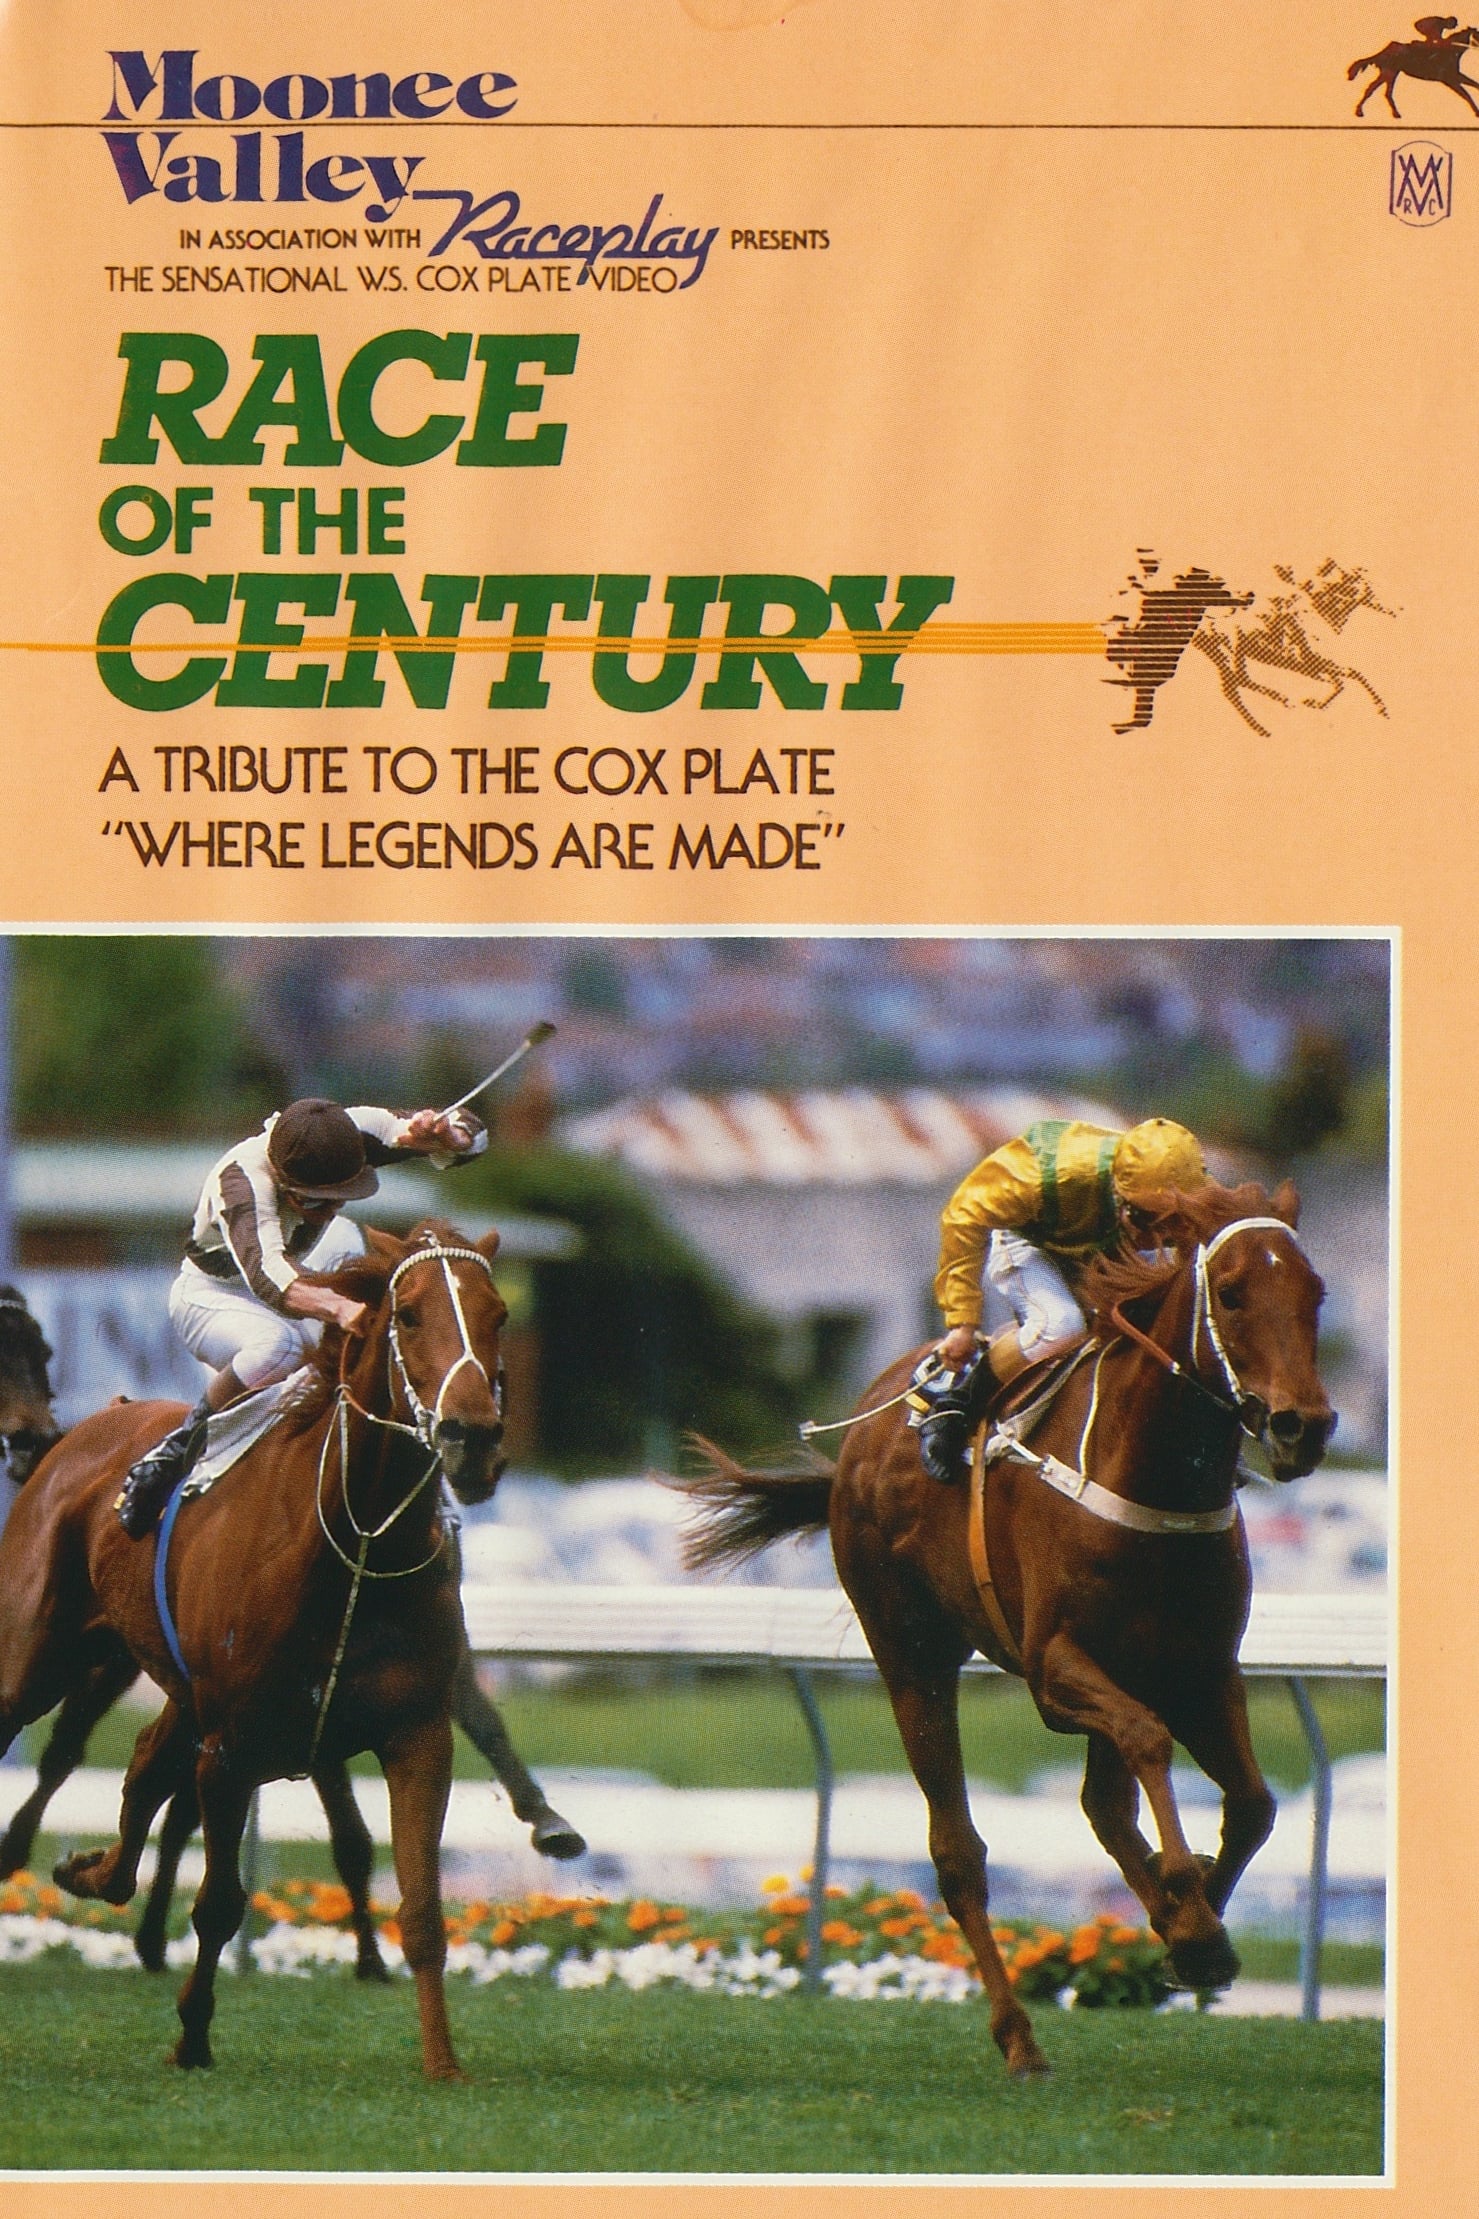 The Cox Plate: Race of the Century